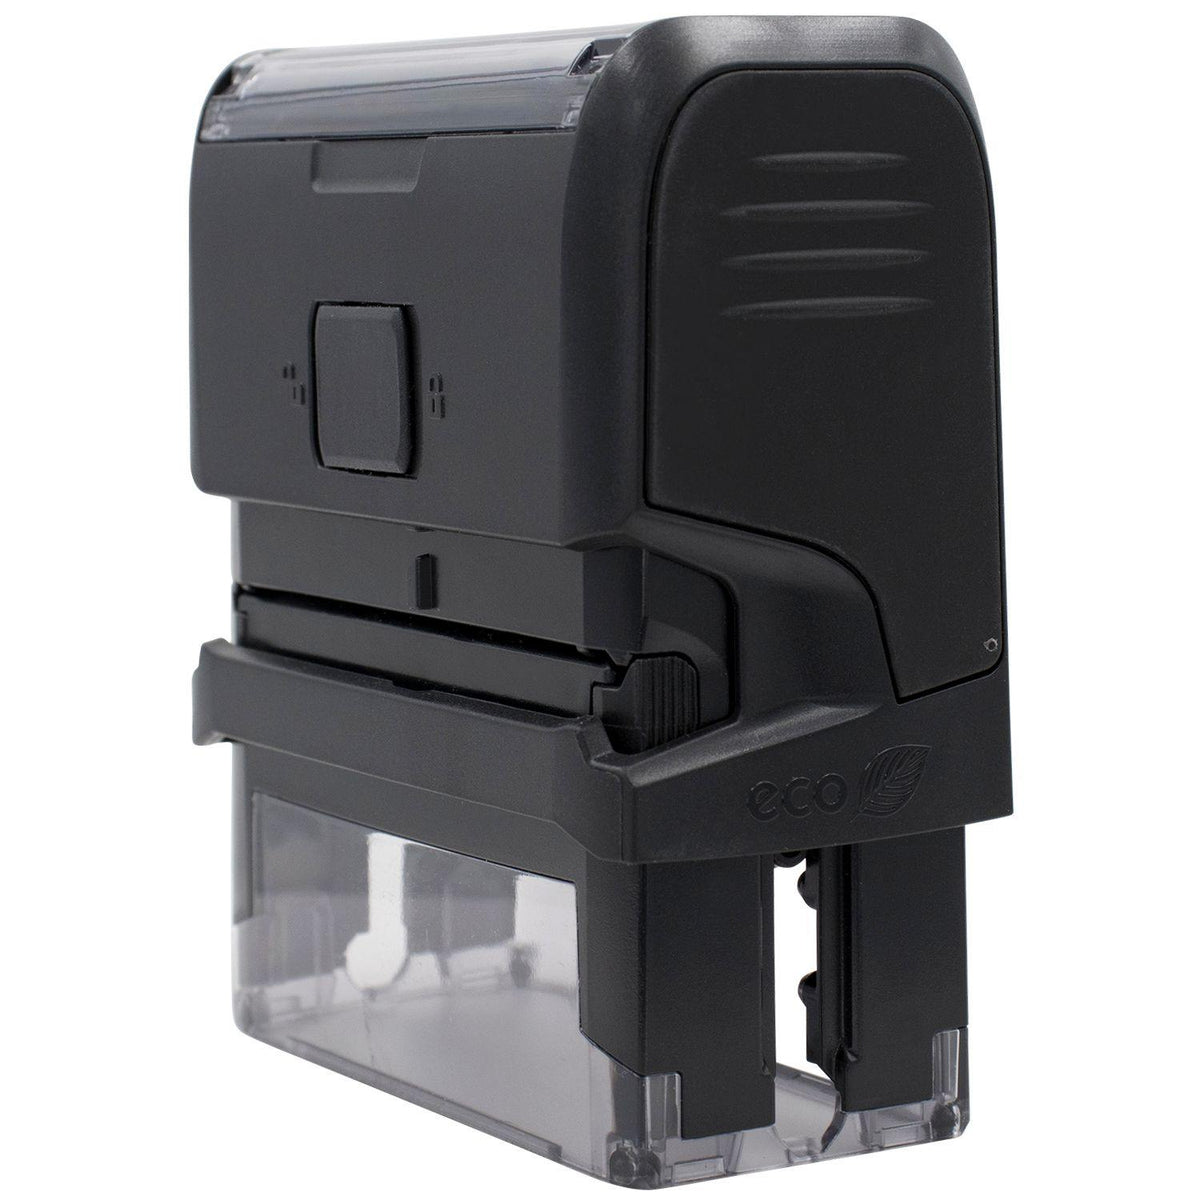 Self-Inking Fax Stamp Stamp - Engineer Seal Stamps - Brand_Trodat, Impression Size_Small, Stamp Type_Self-Inking Stamp, Type of Use_Business, Type of Use_Office, Type of Use_Professional